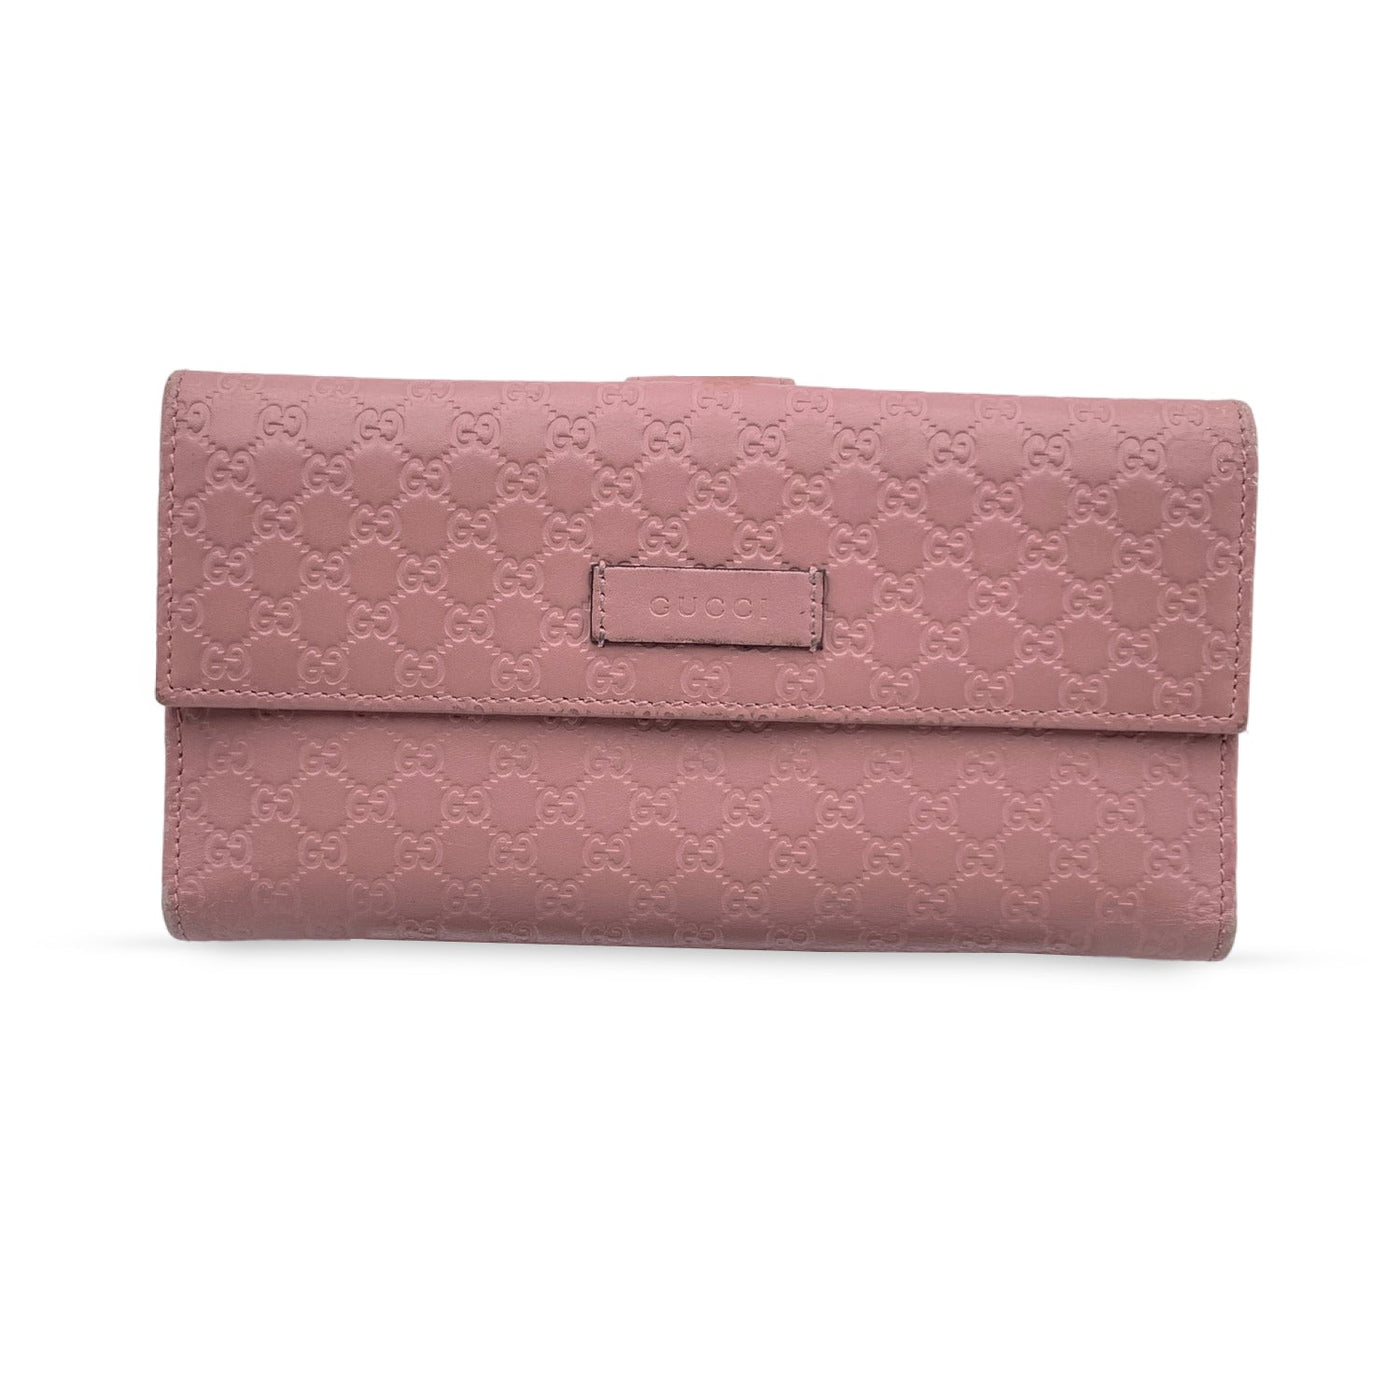 Gucci - GG Marmont leather wallet Pale pink - The Corner